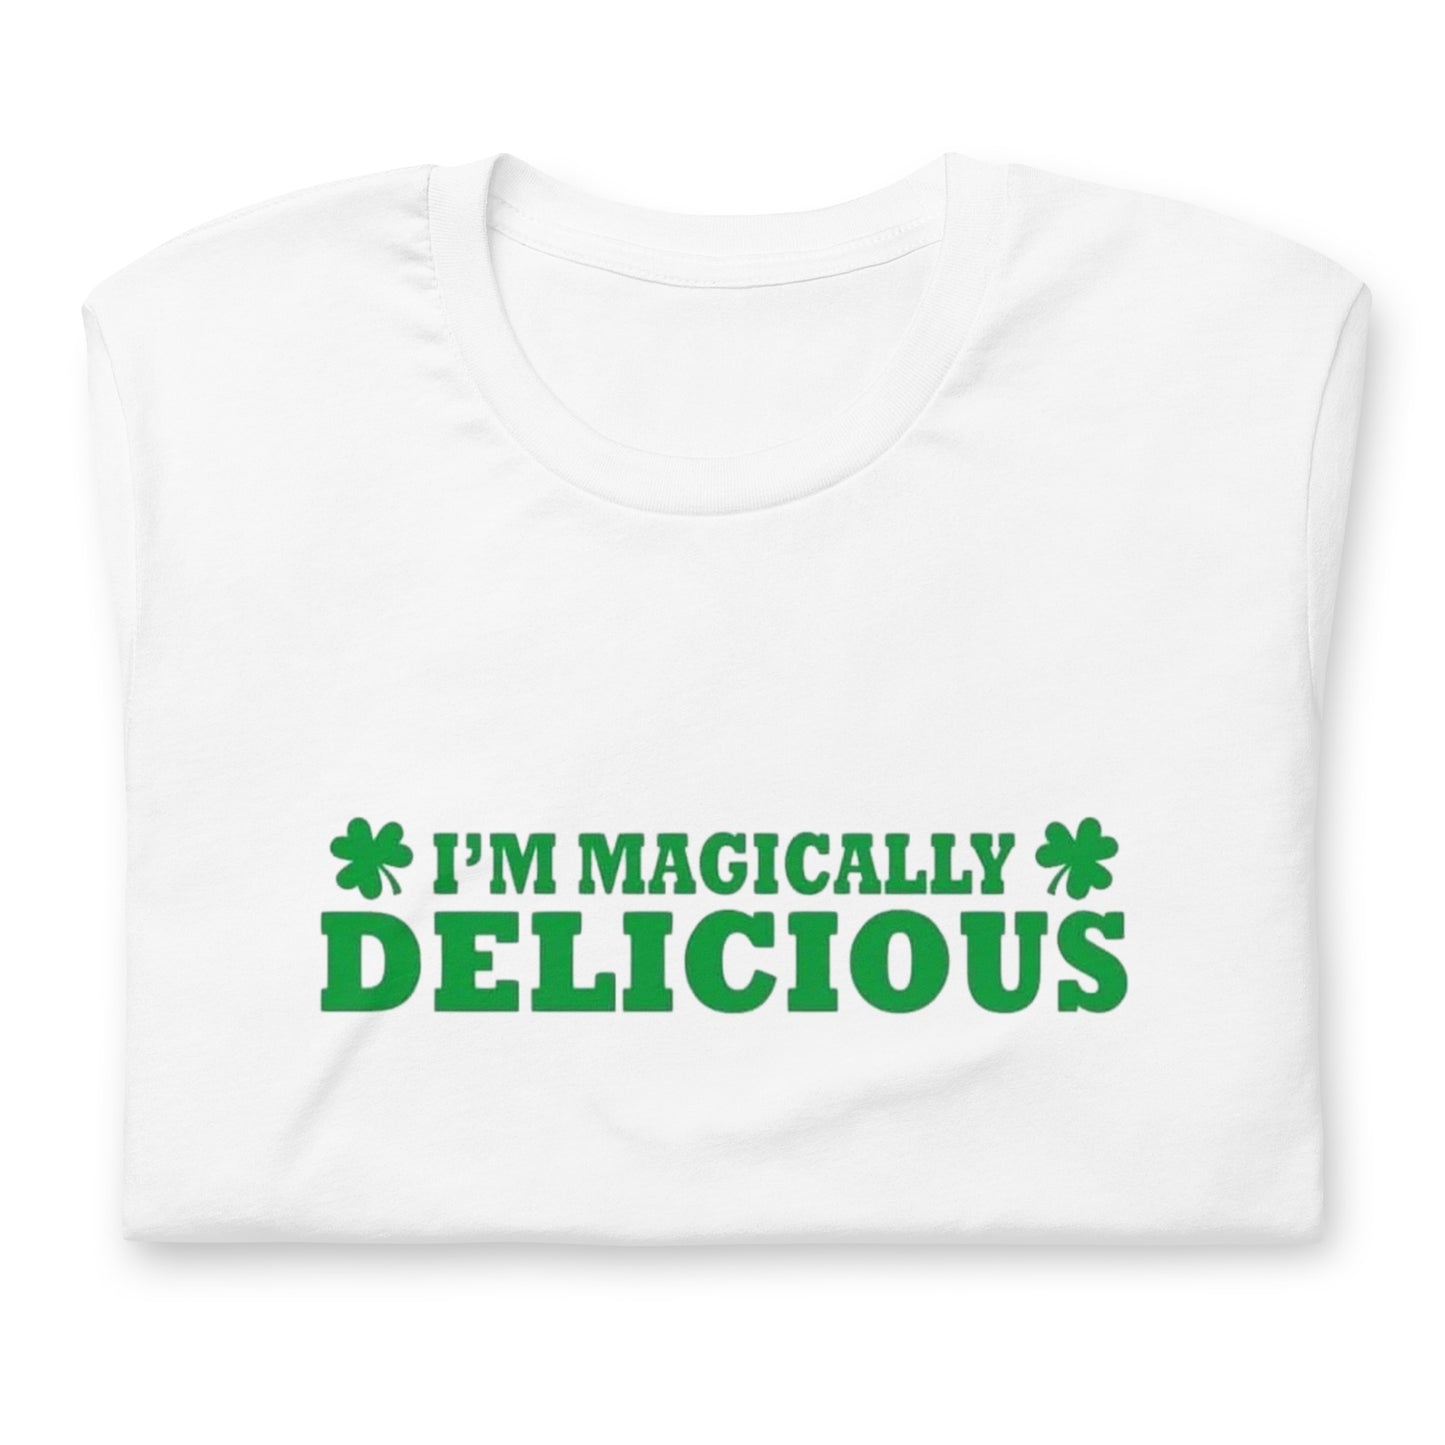 Magically Delicious Unisex T-shirt